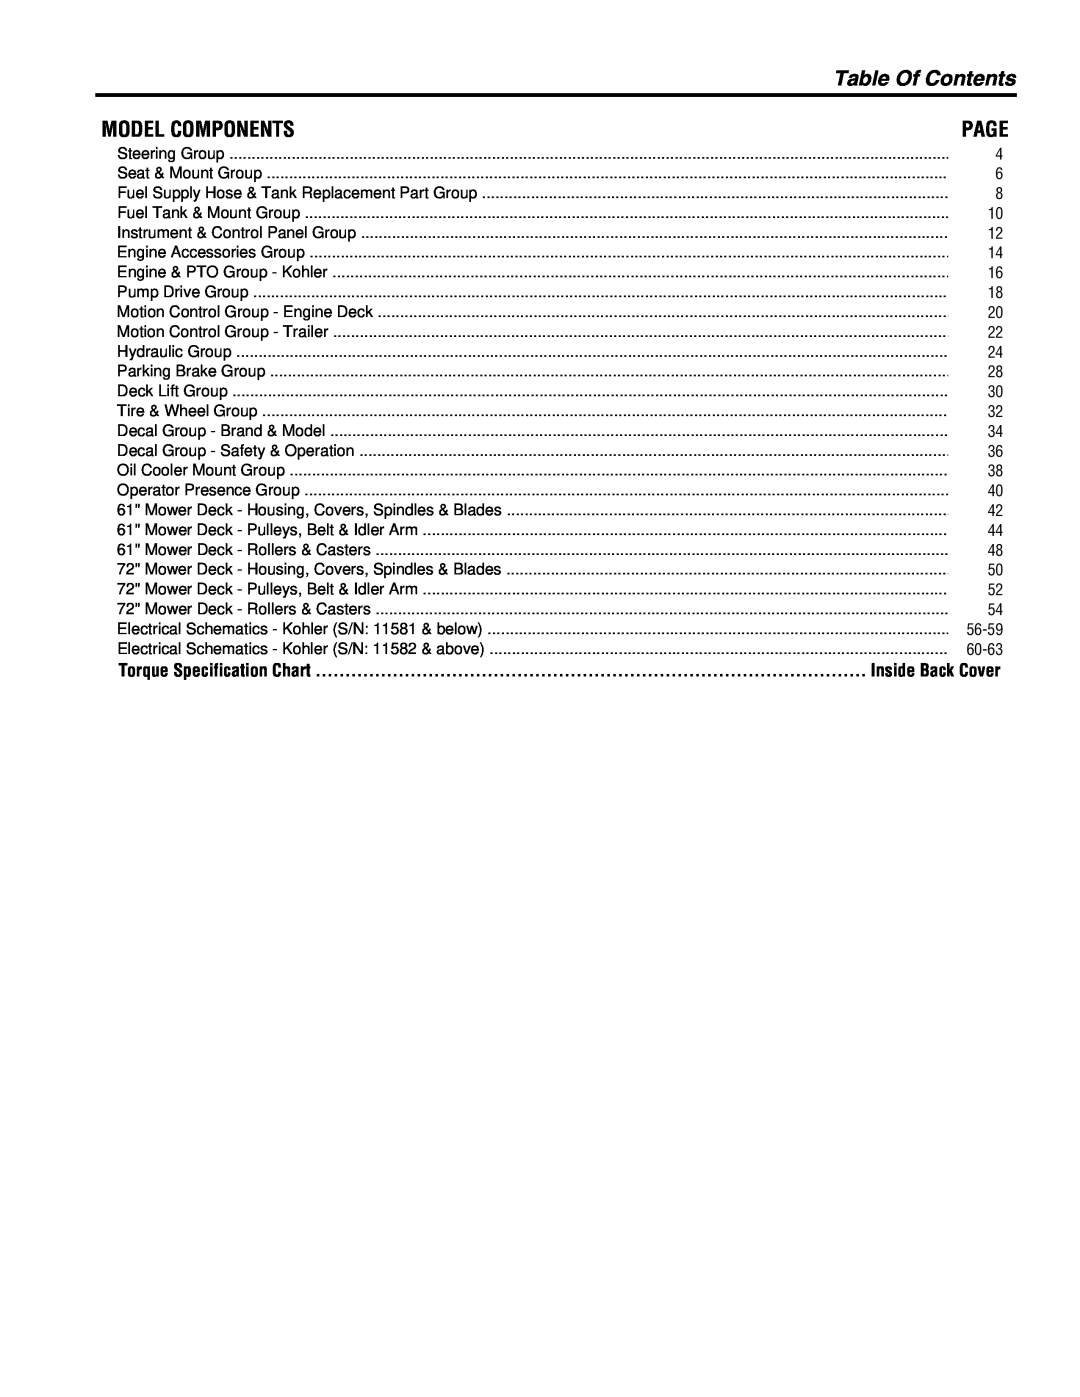 Ferris Industries 5900227, 5901036, 5901035, 5900228 Table Of Contents, Model Components, Page, Torque Specification Chart 